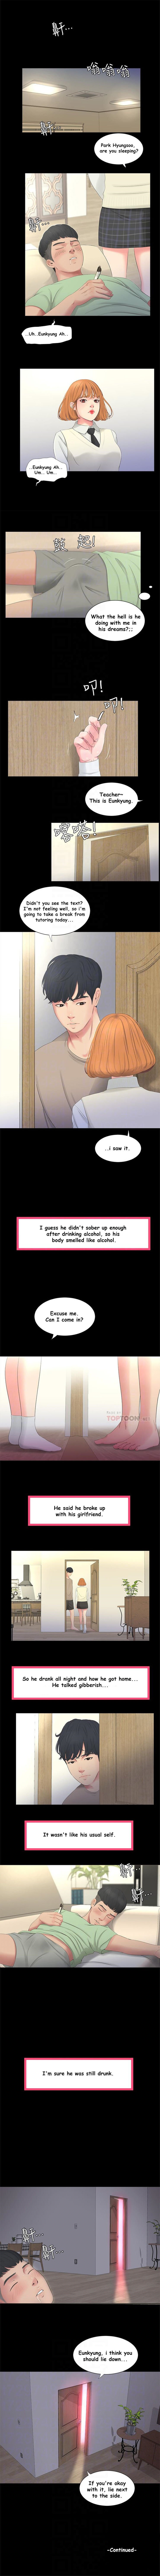 maidens-in-law-chap-3-3